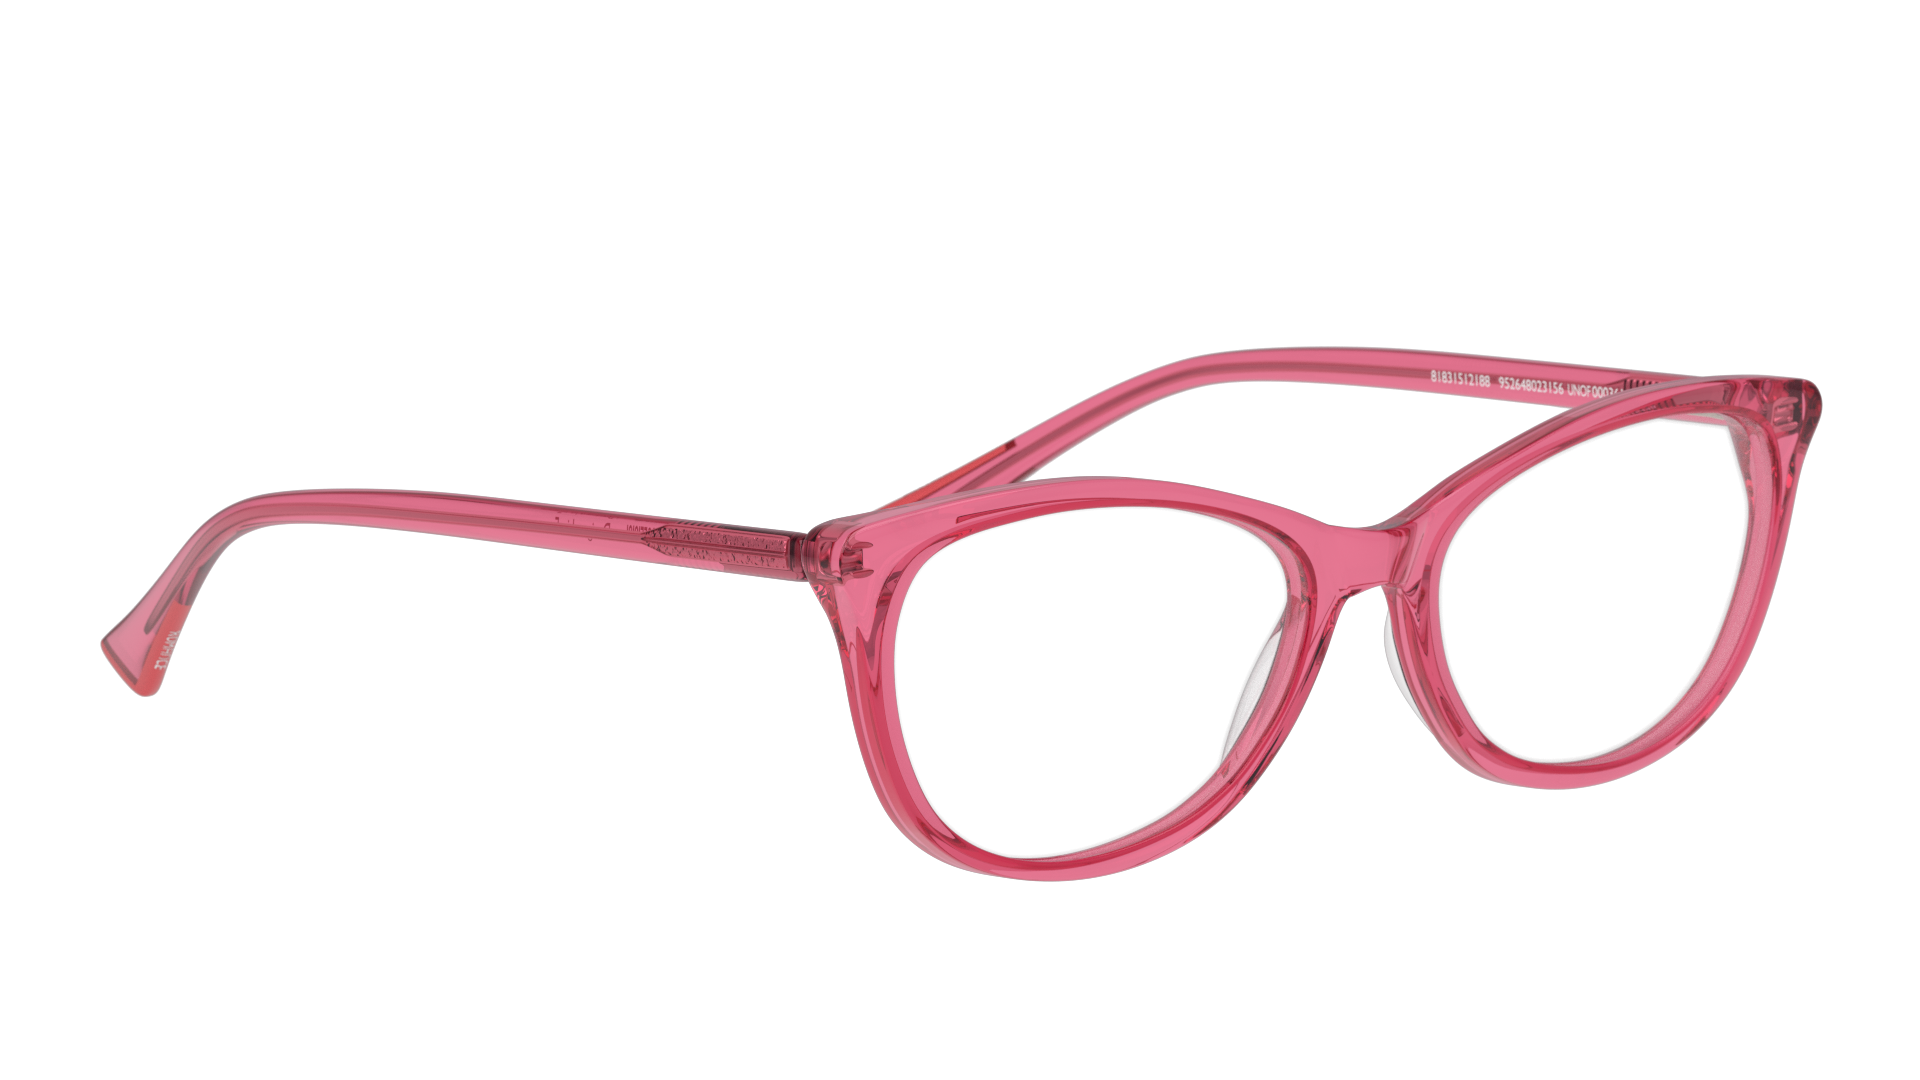 Angle_Right01 Unofficial UNOF0003 (PT00) Glasses Transparent / Pink